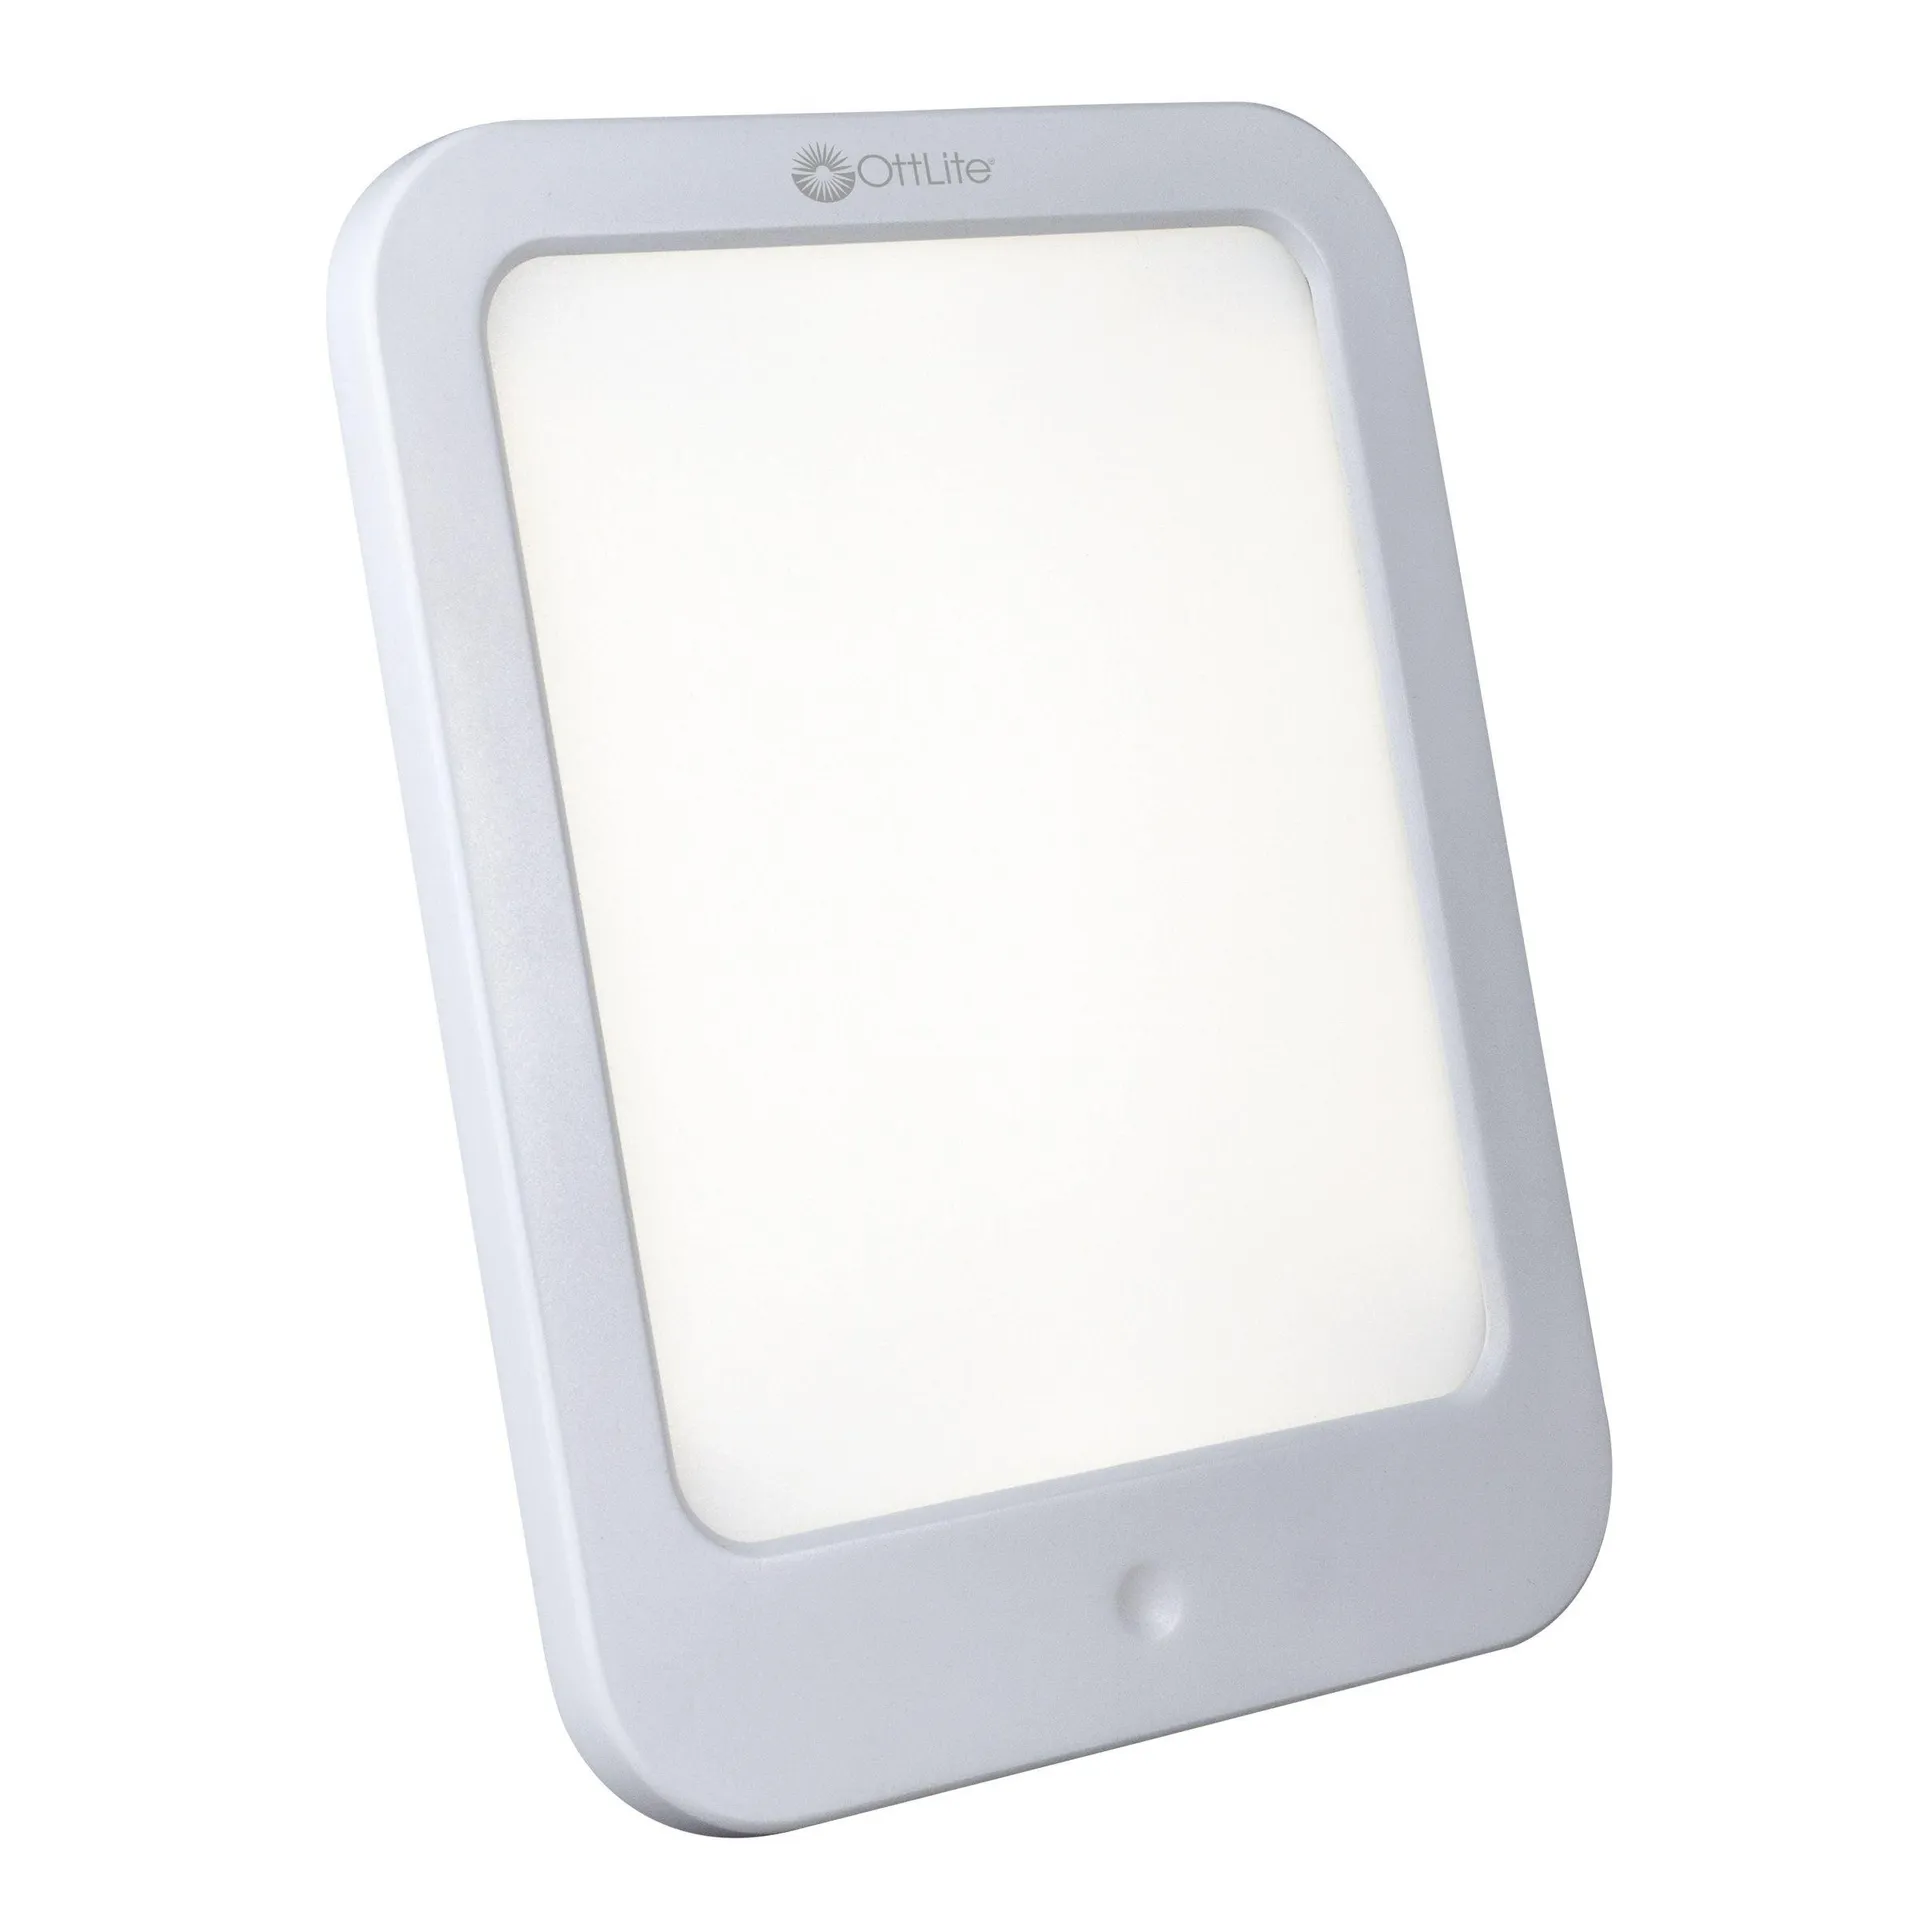 Ottlite ClearSun LED Light Therapy Lamp